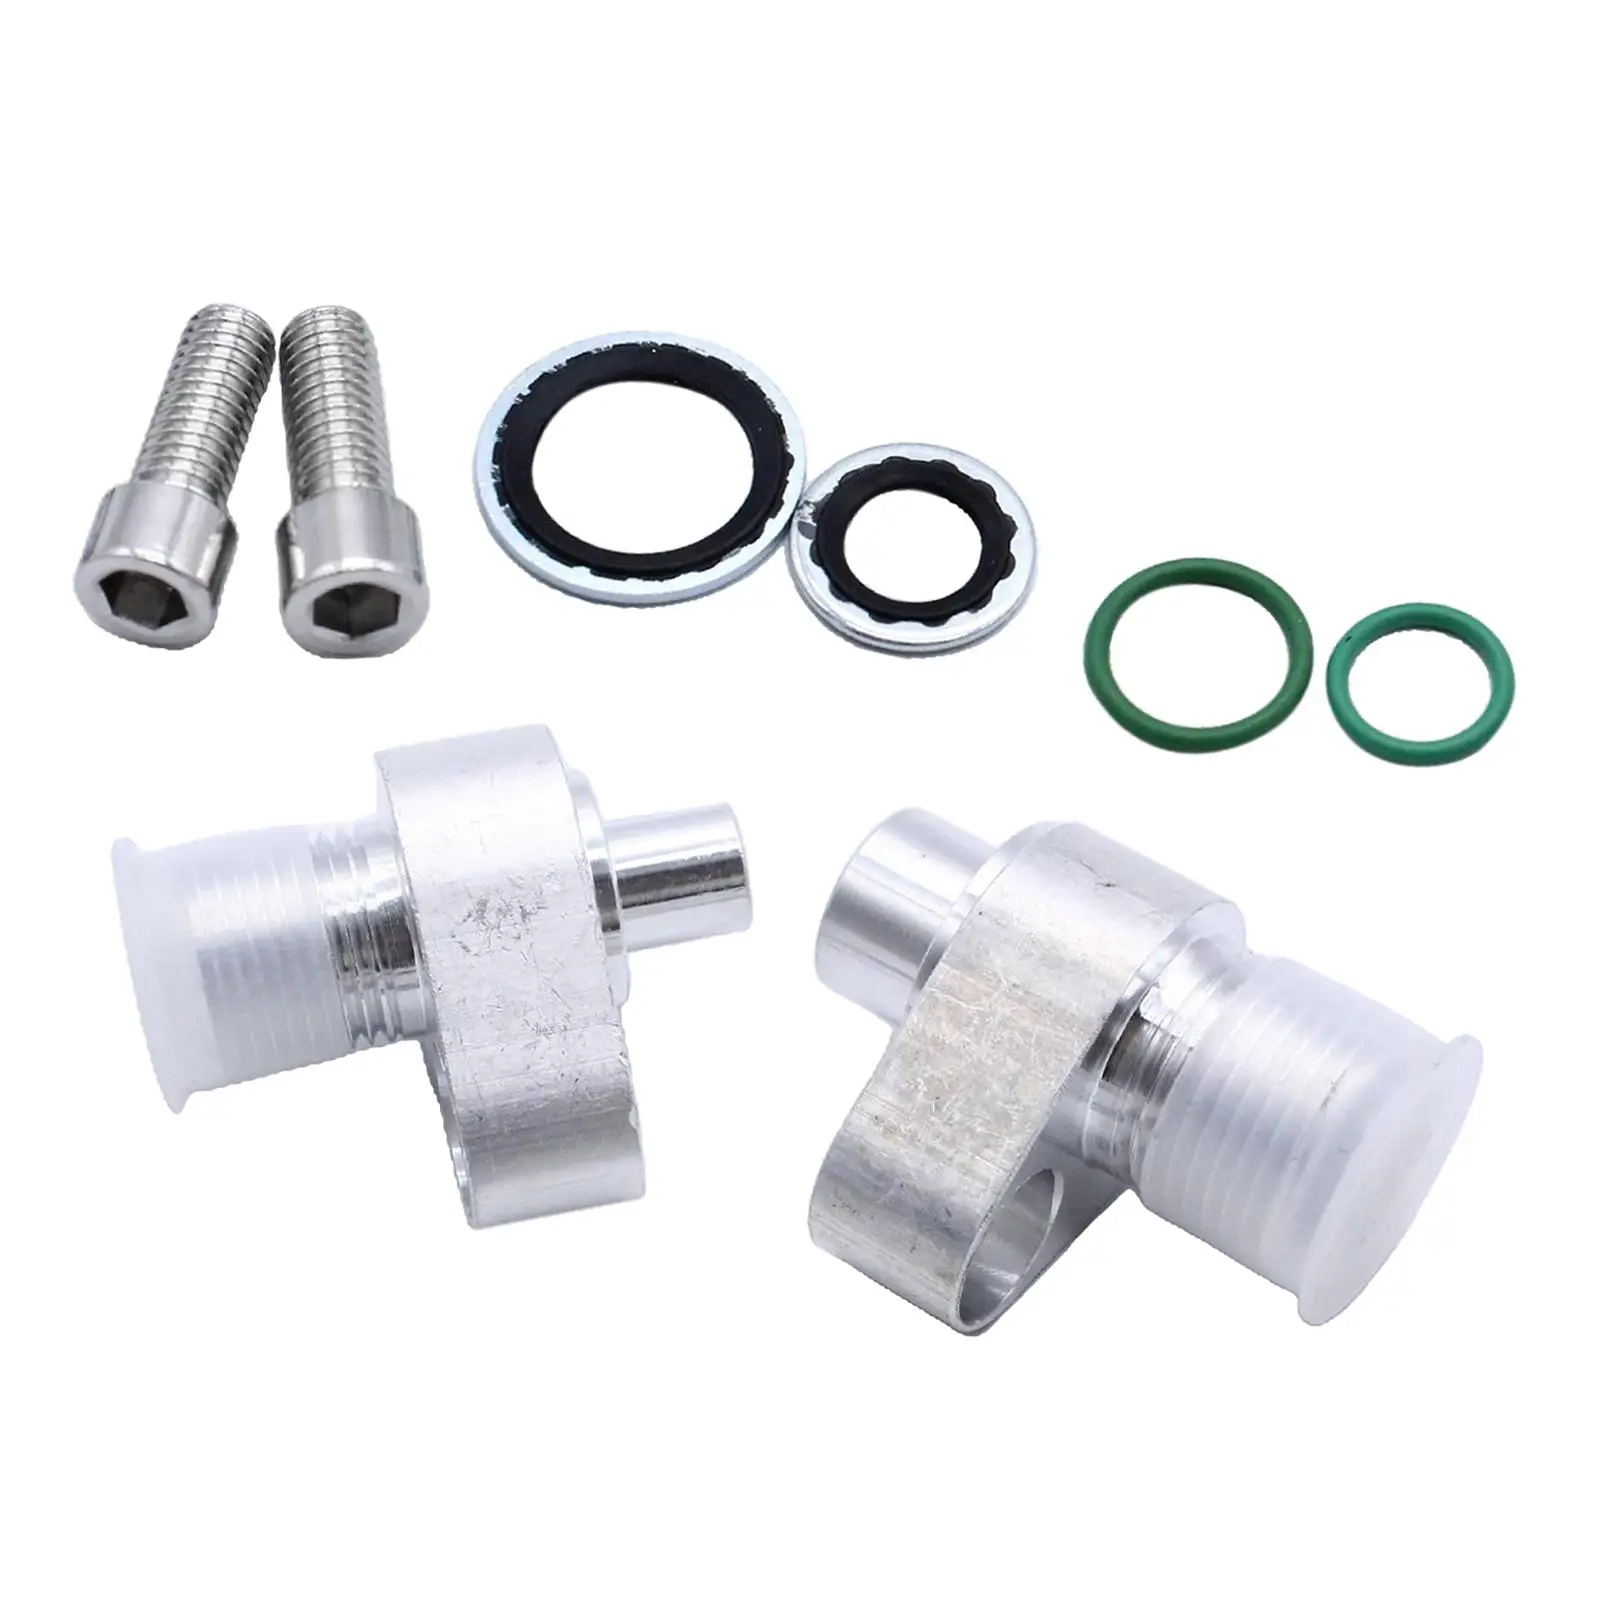 451-1105 cessories  Compressor Connector Adapter Fittings Fit for